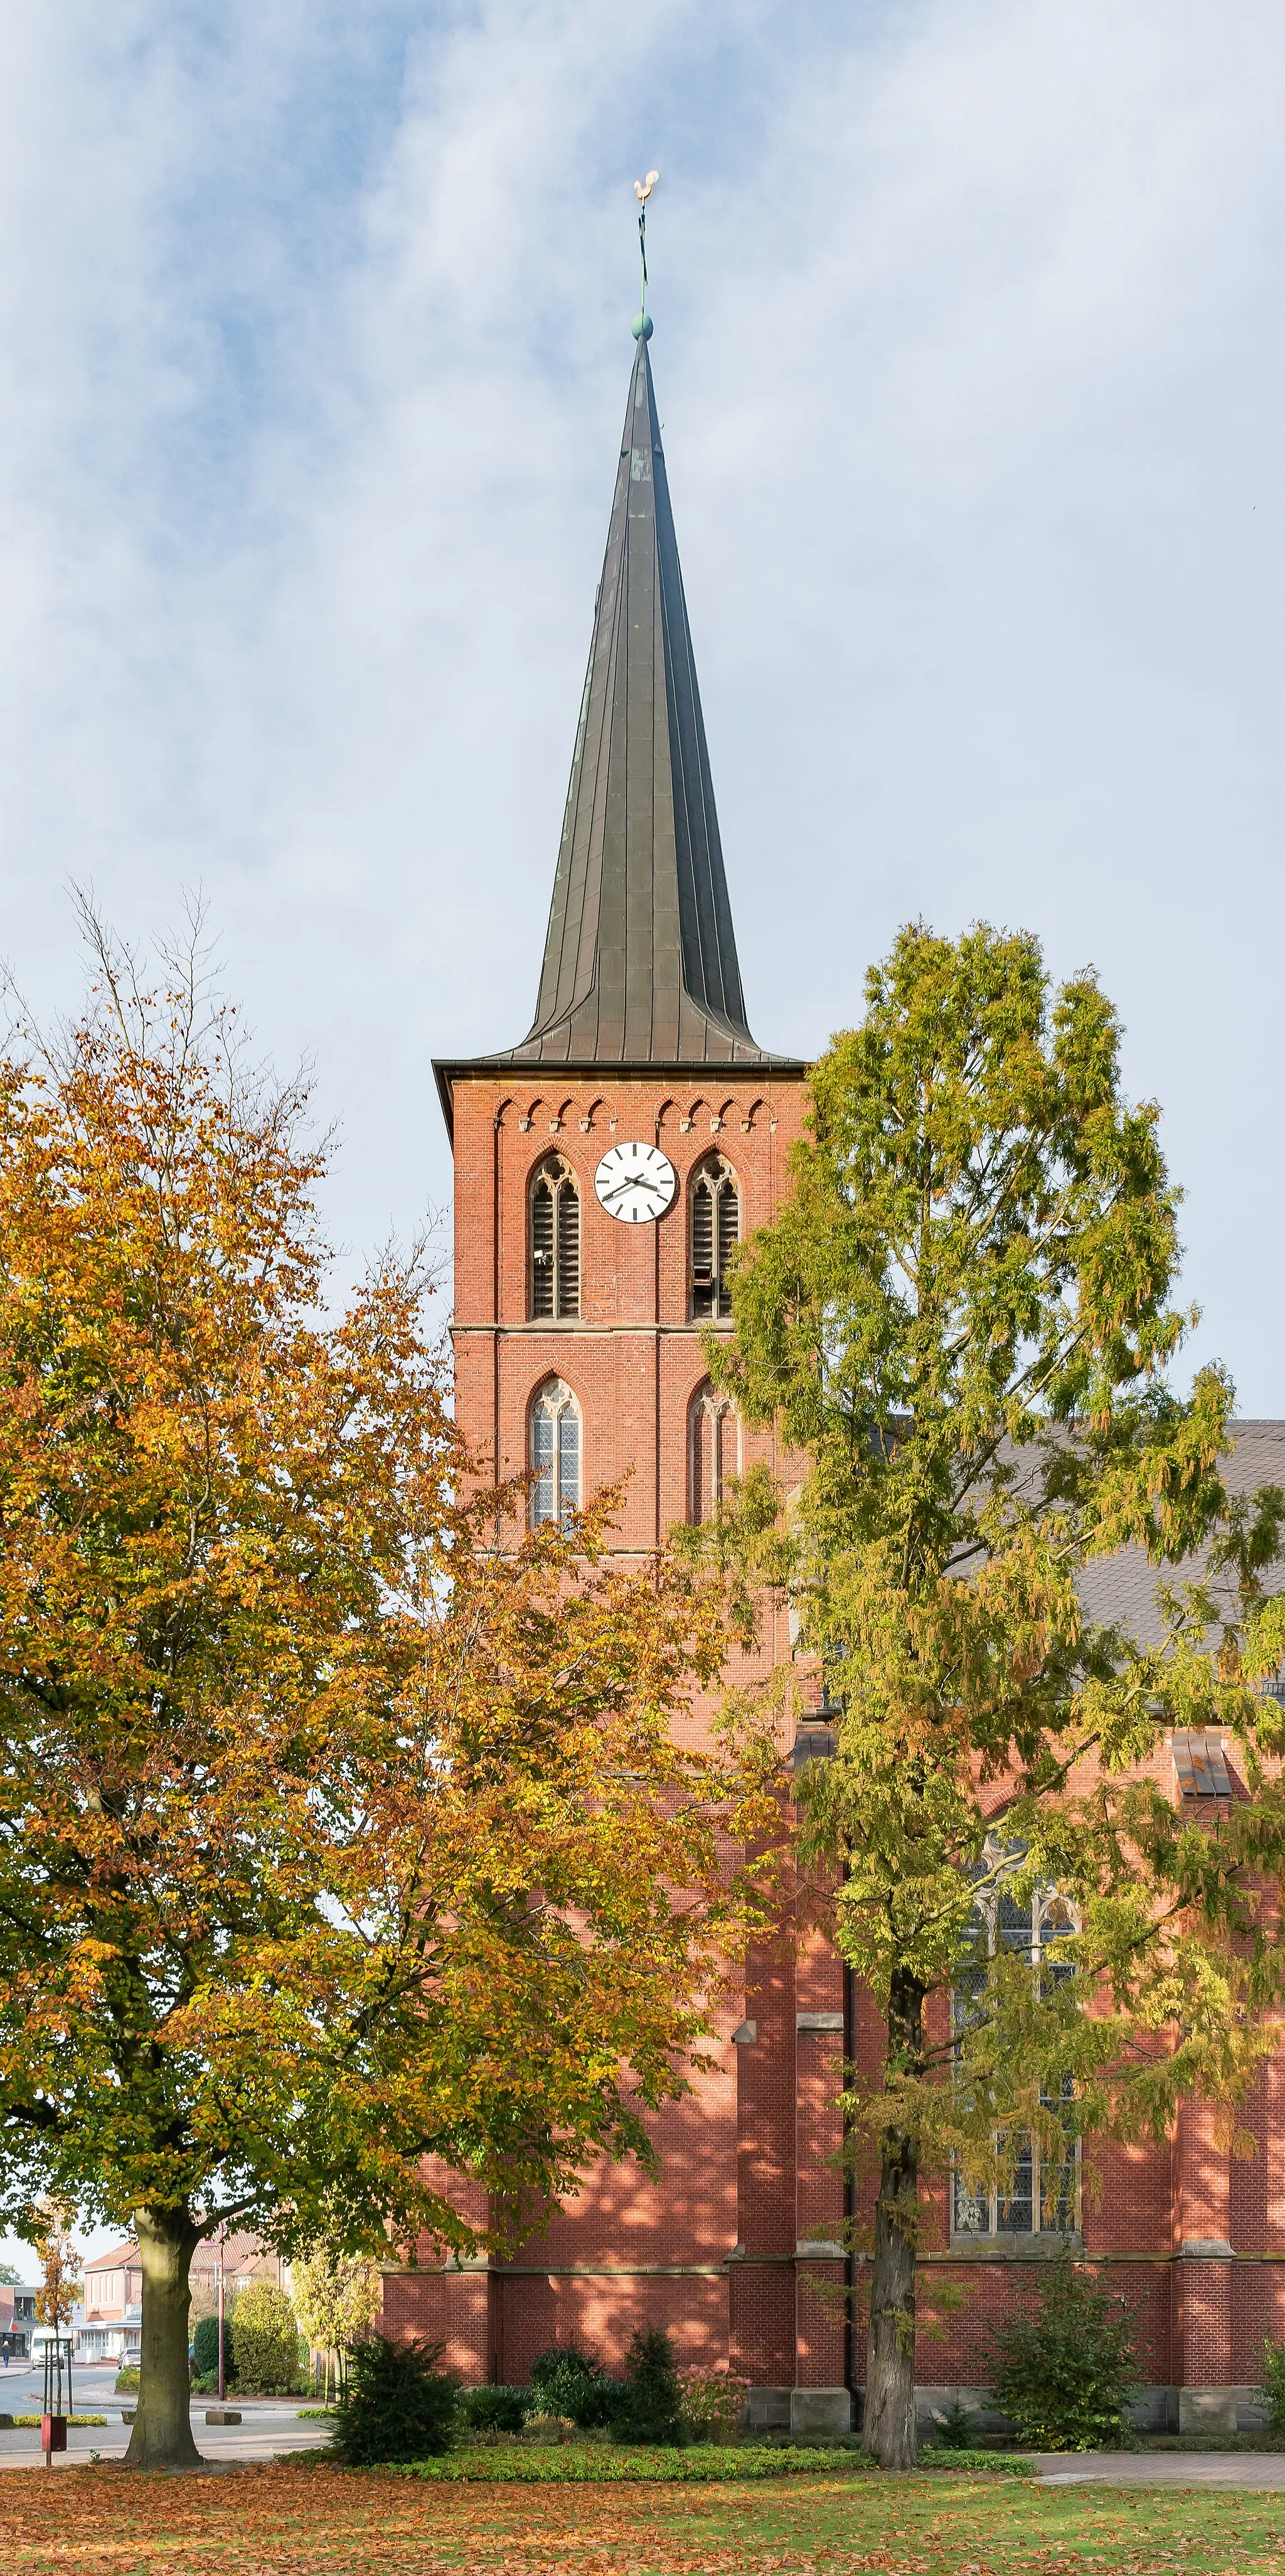 Photo showing: Saint Peter church in Lastrup, Lower Saxony, Germany